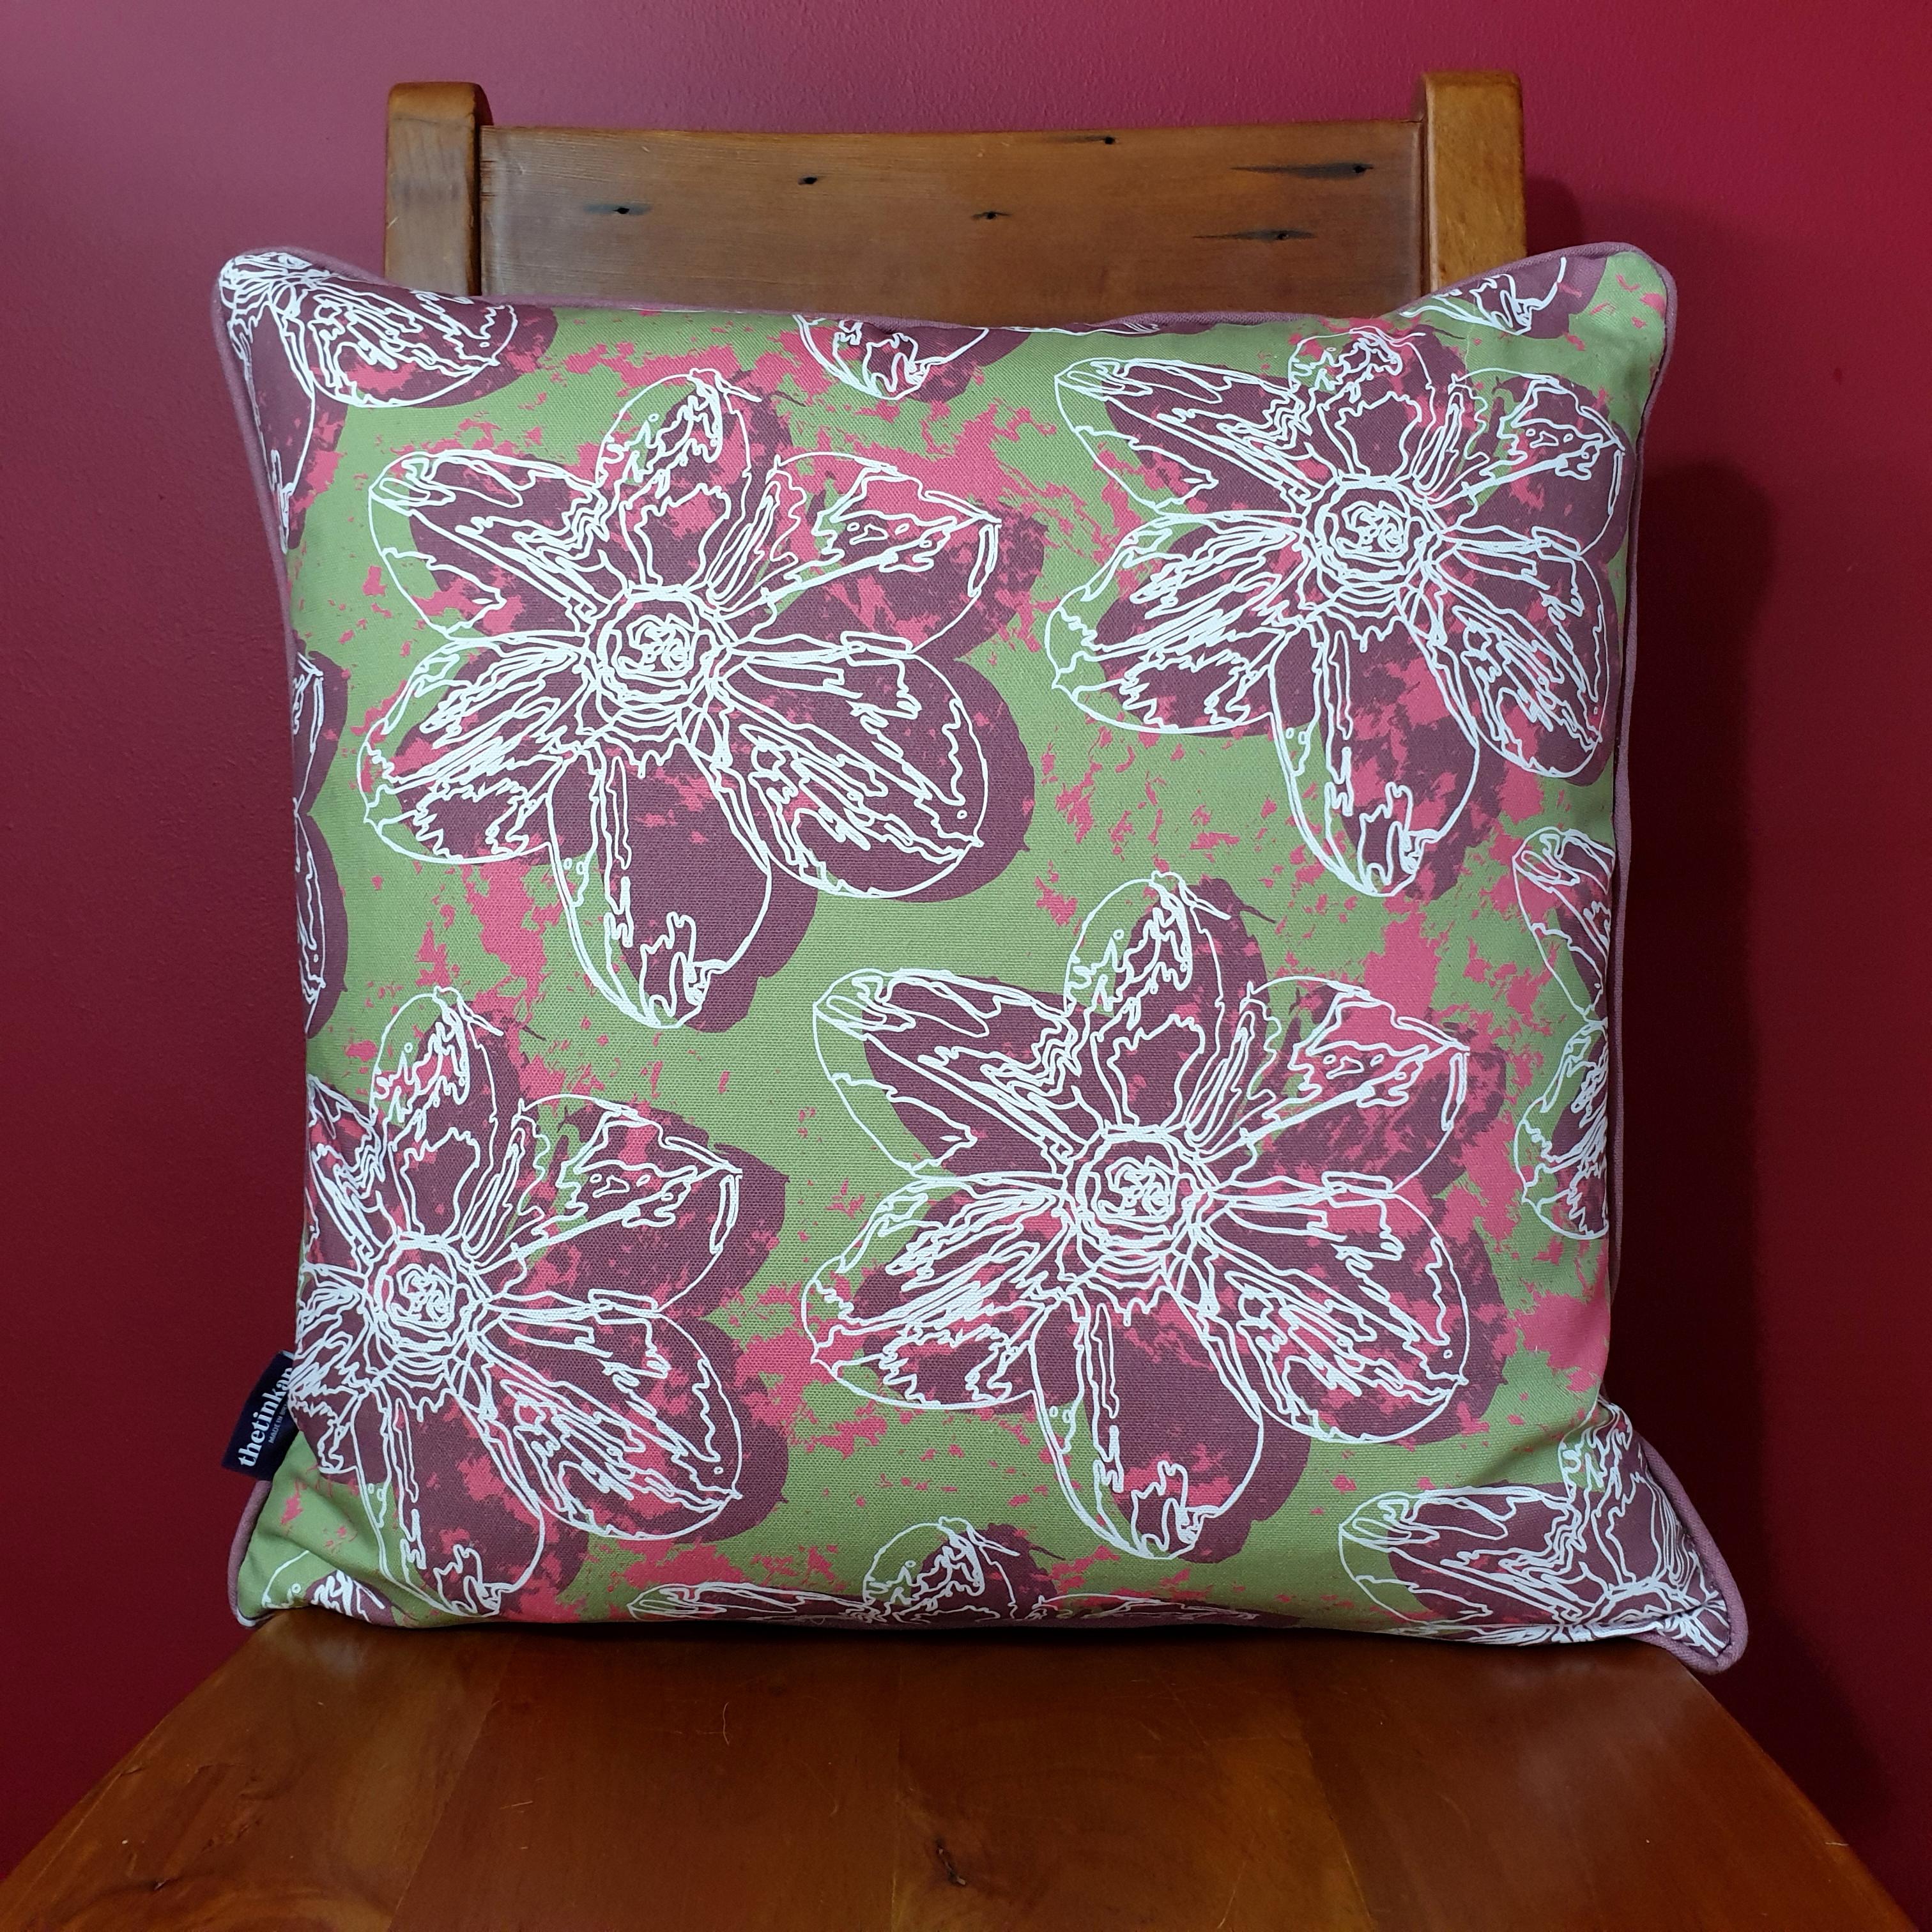 Double-sided 51cm square Flower Splash cushion designed by thetinkan. Dark red narcissus flower and dark red piping with white traced outline set within an olive green background with salmon pink paint splashes. Available with an optional luxury cushion inner pad. VIEW PRODUCT >>